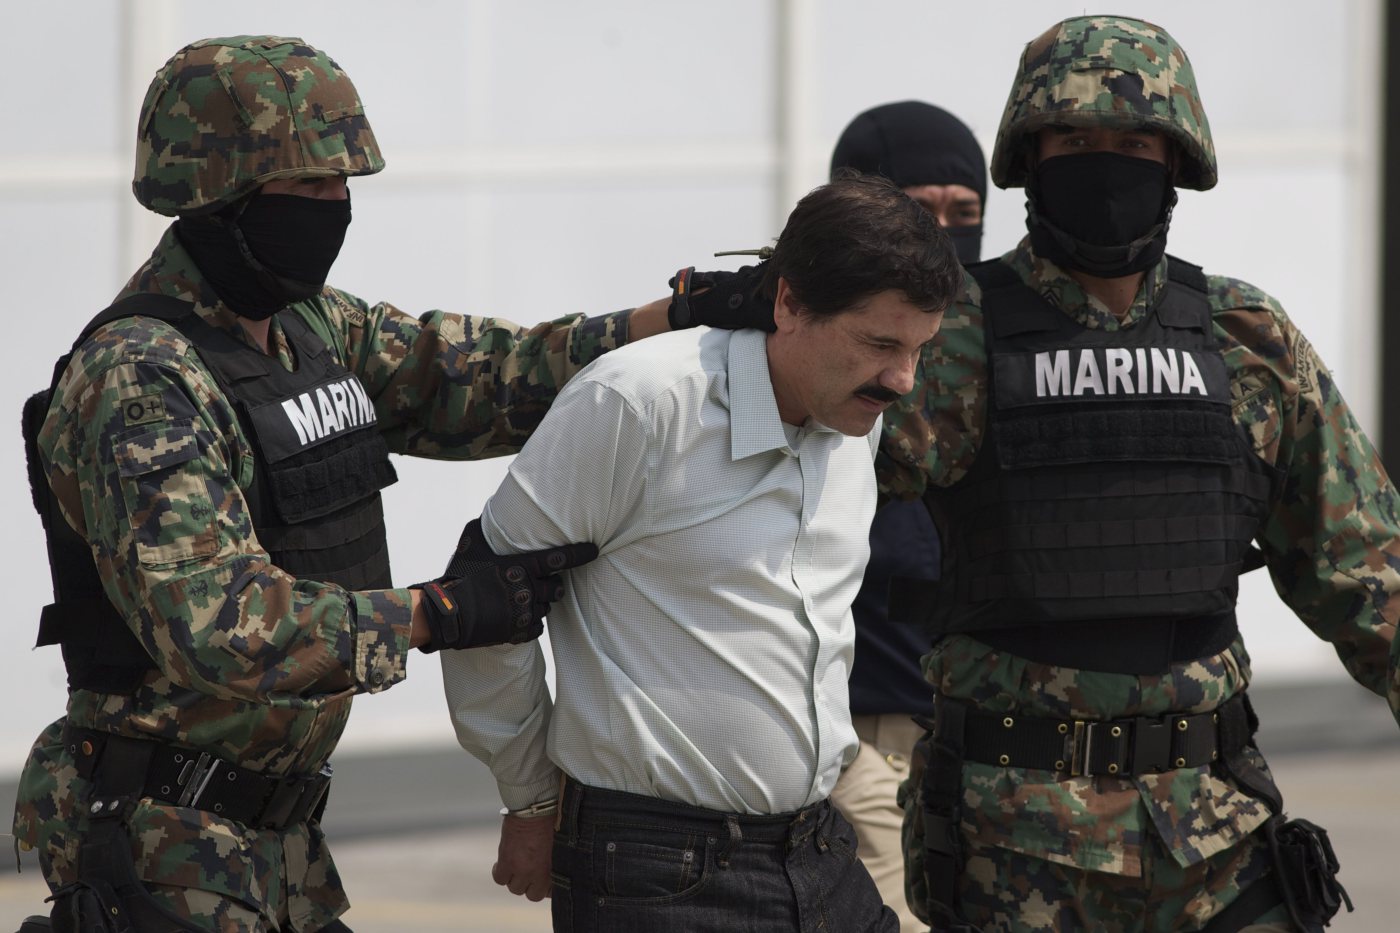 Joaquin "El Chapo" Guzman is escorted to a helicopter in handcuffs by Mexican marines at a navy hanger in Mexico City, on Feb. 22, 2014.